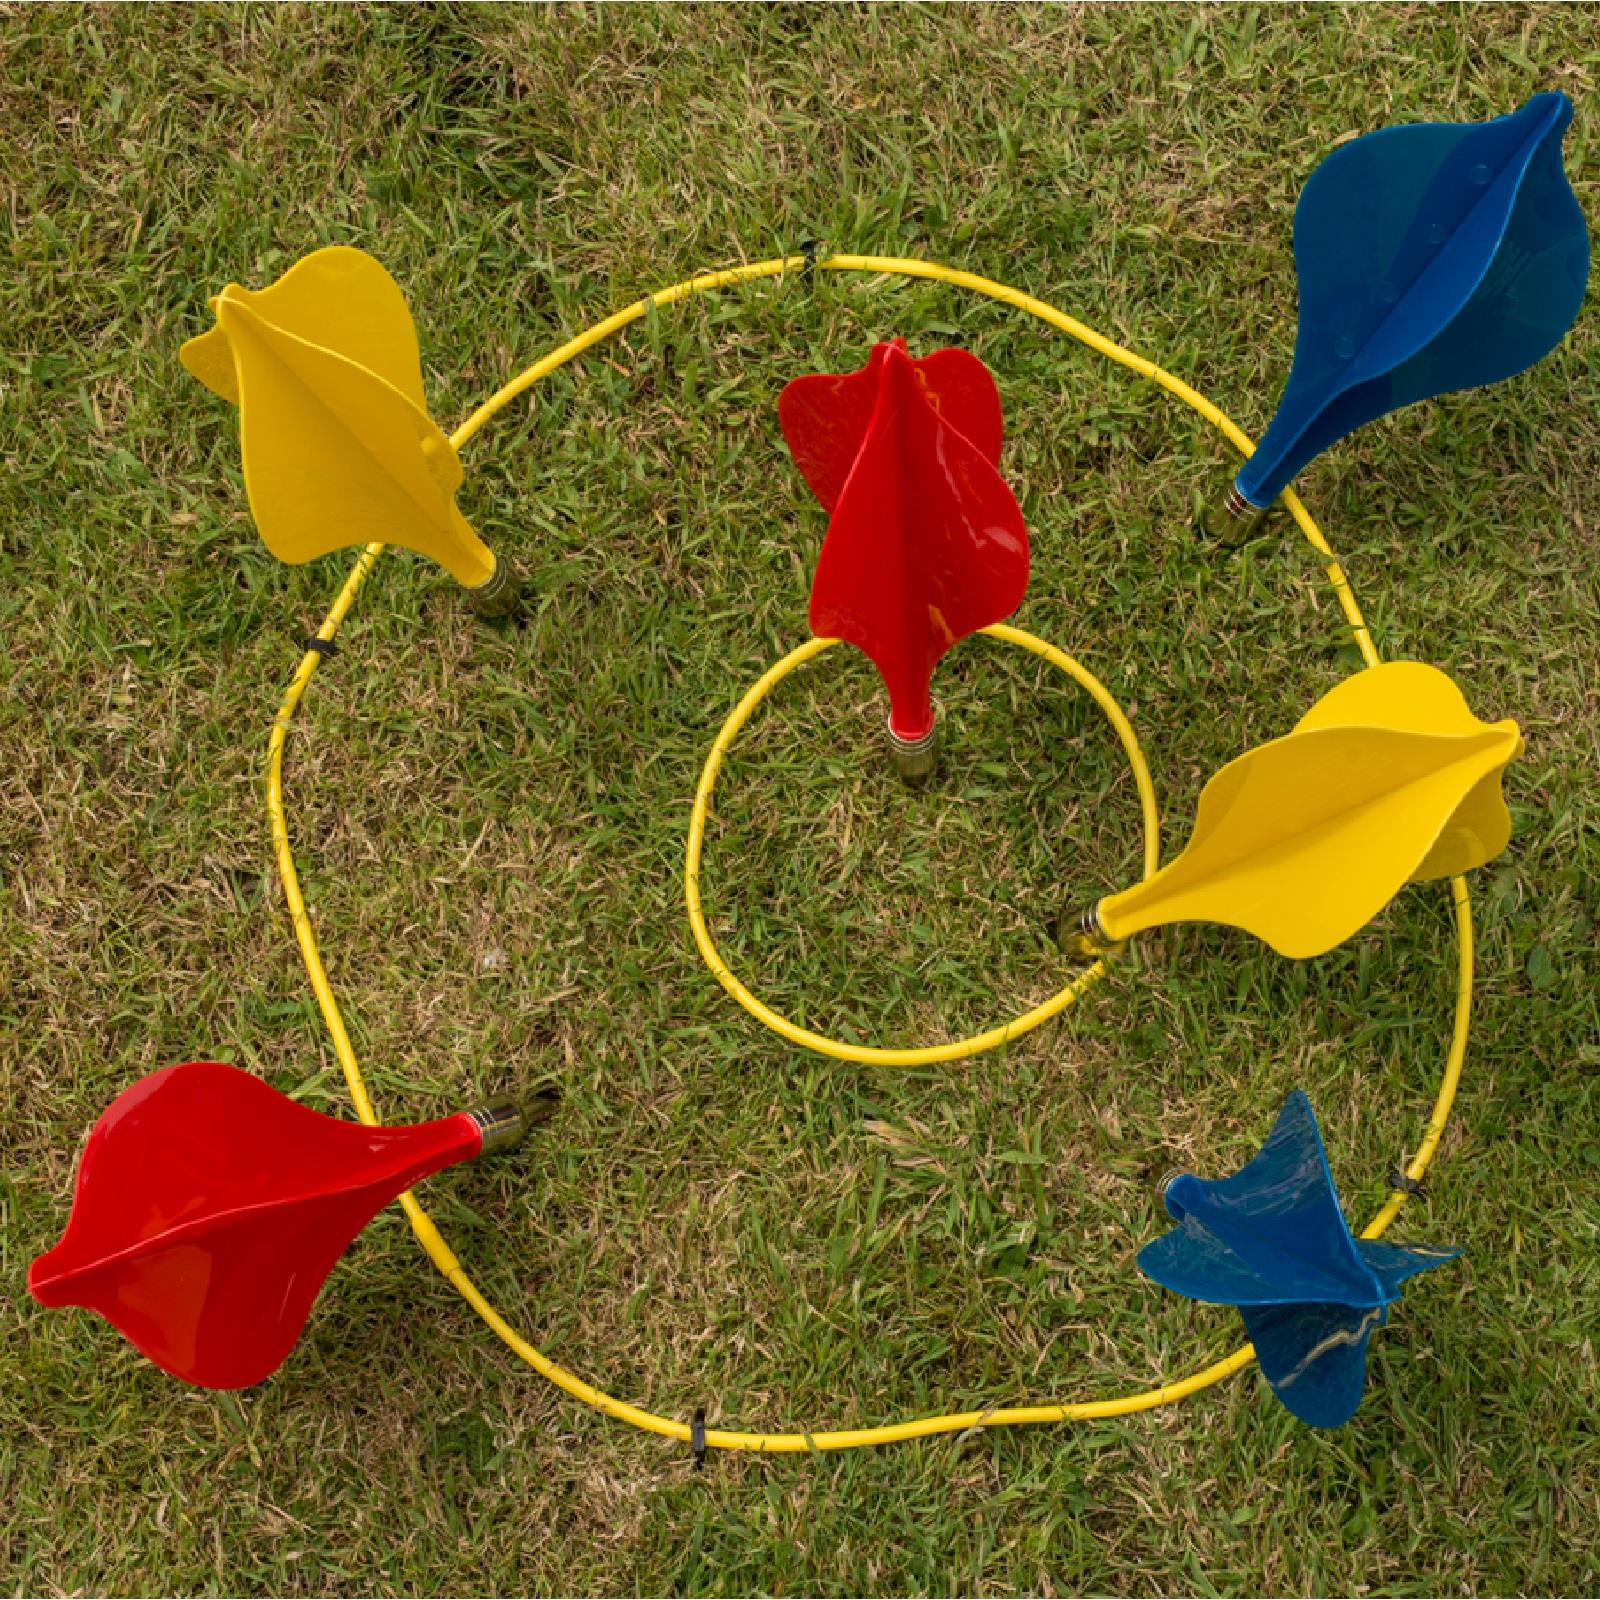 Large kids Garden Lawn Darts Toss Throwing Game Set Party Fun Family Outdoor 